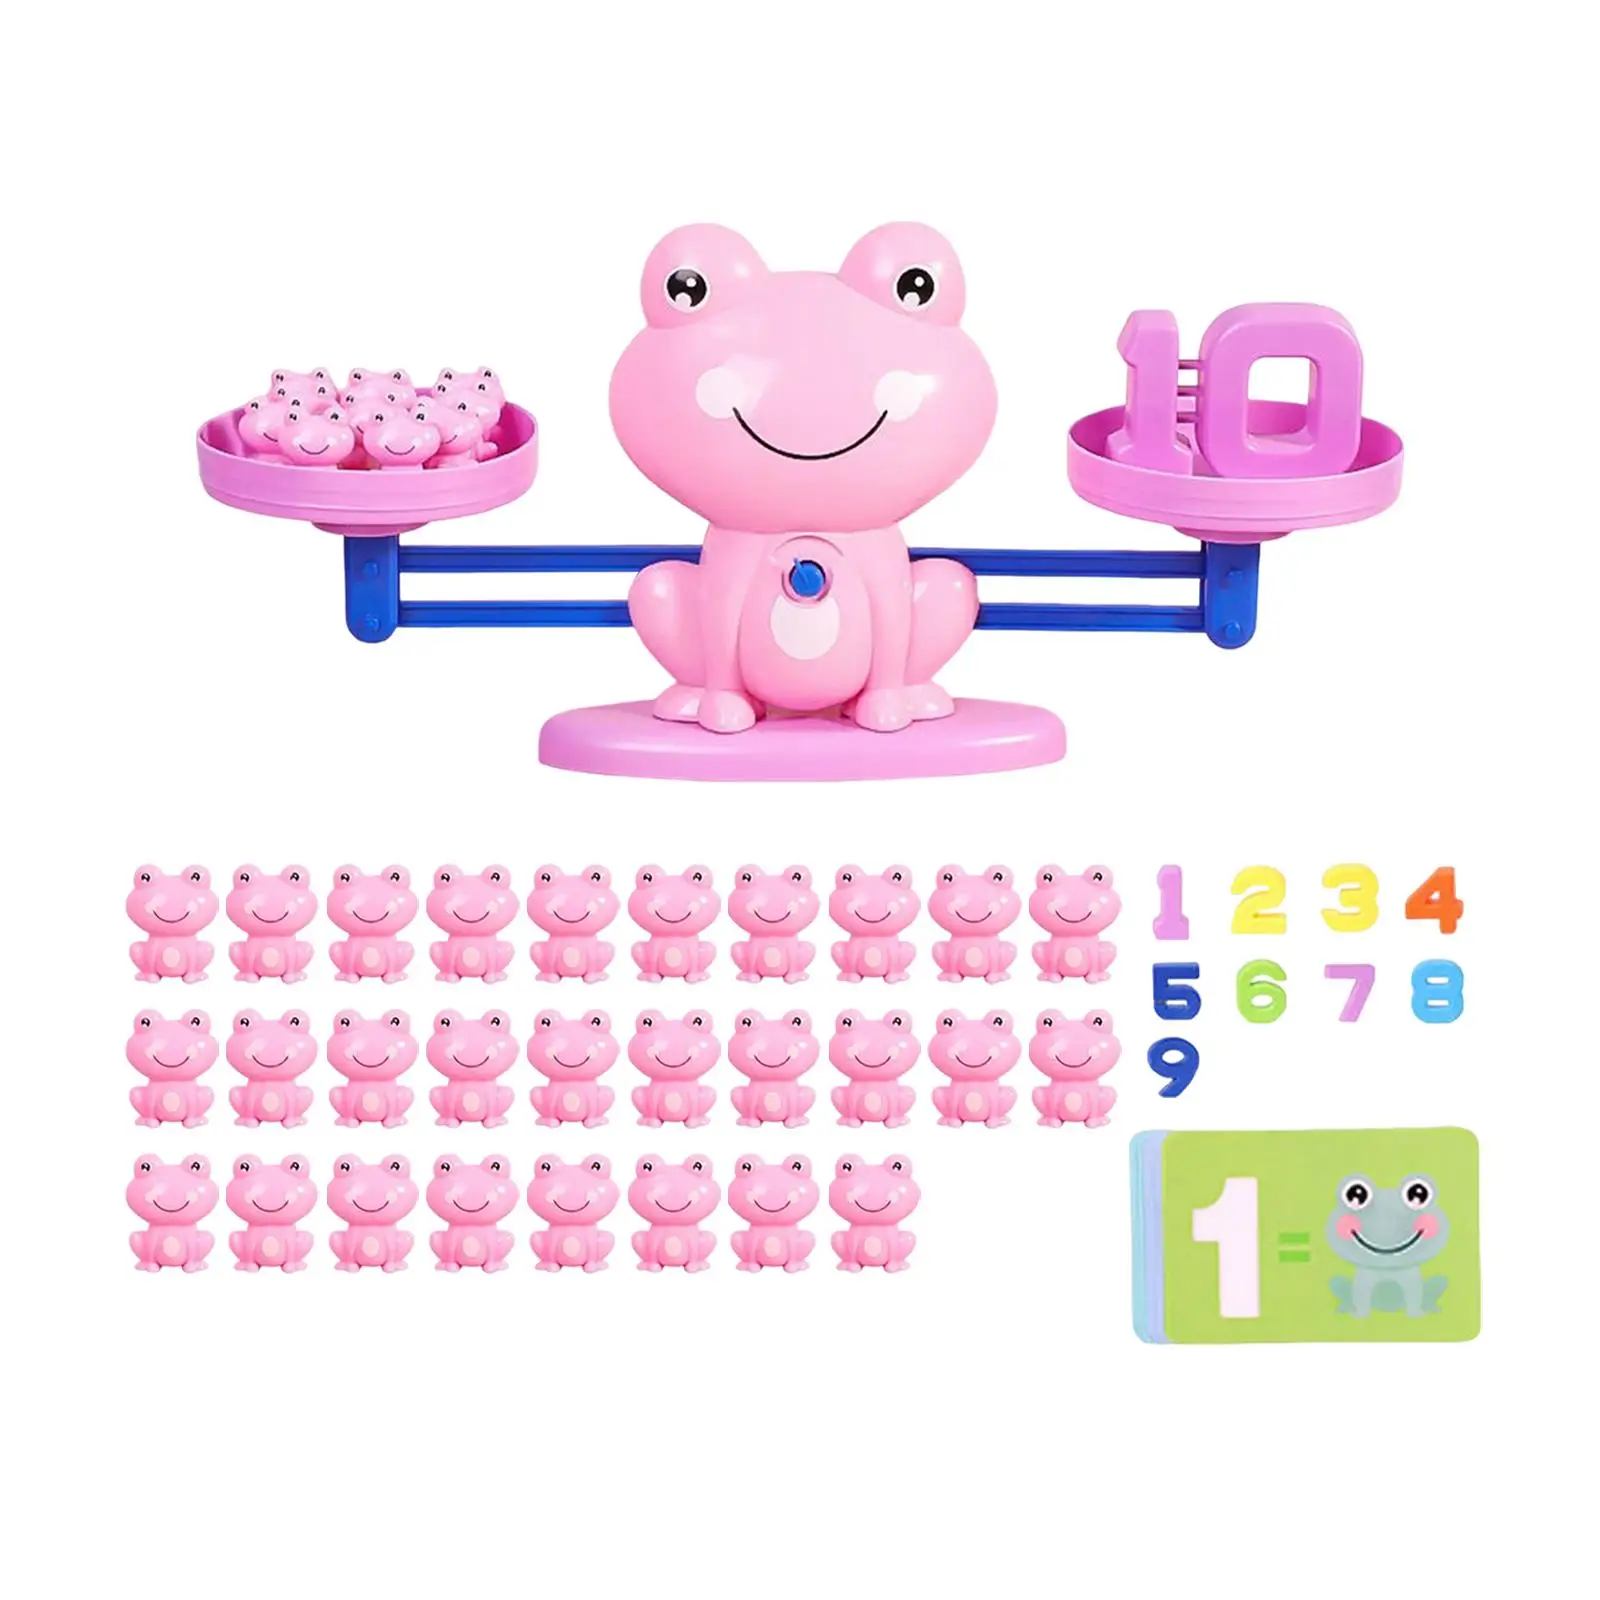 Balance Math Game Number Counting Toy Learning Activities for Children Gifts